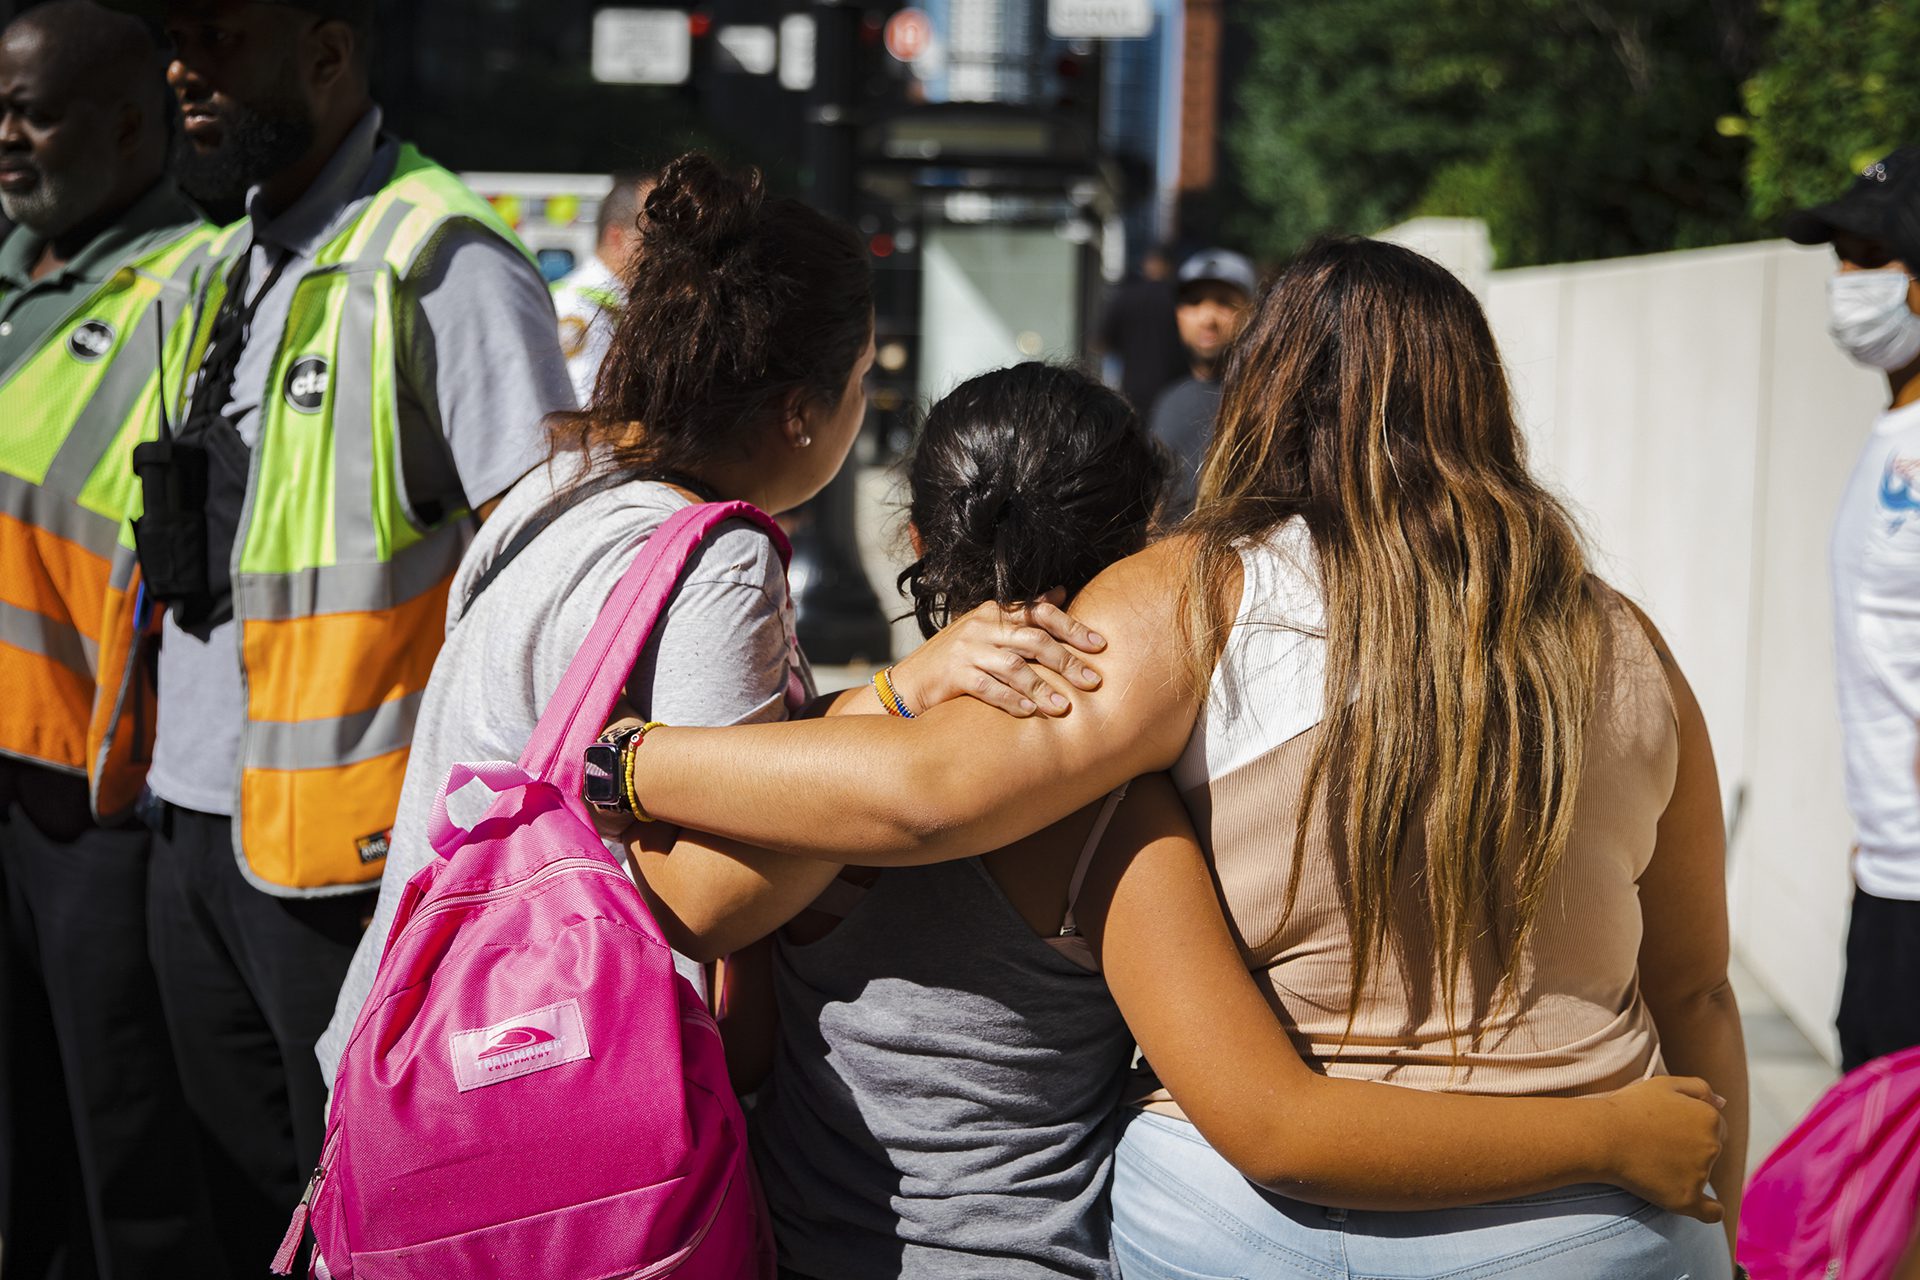 Migrants hub by a bus after being sent to Chicago from Texas by Gov. Greg Abbott